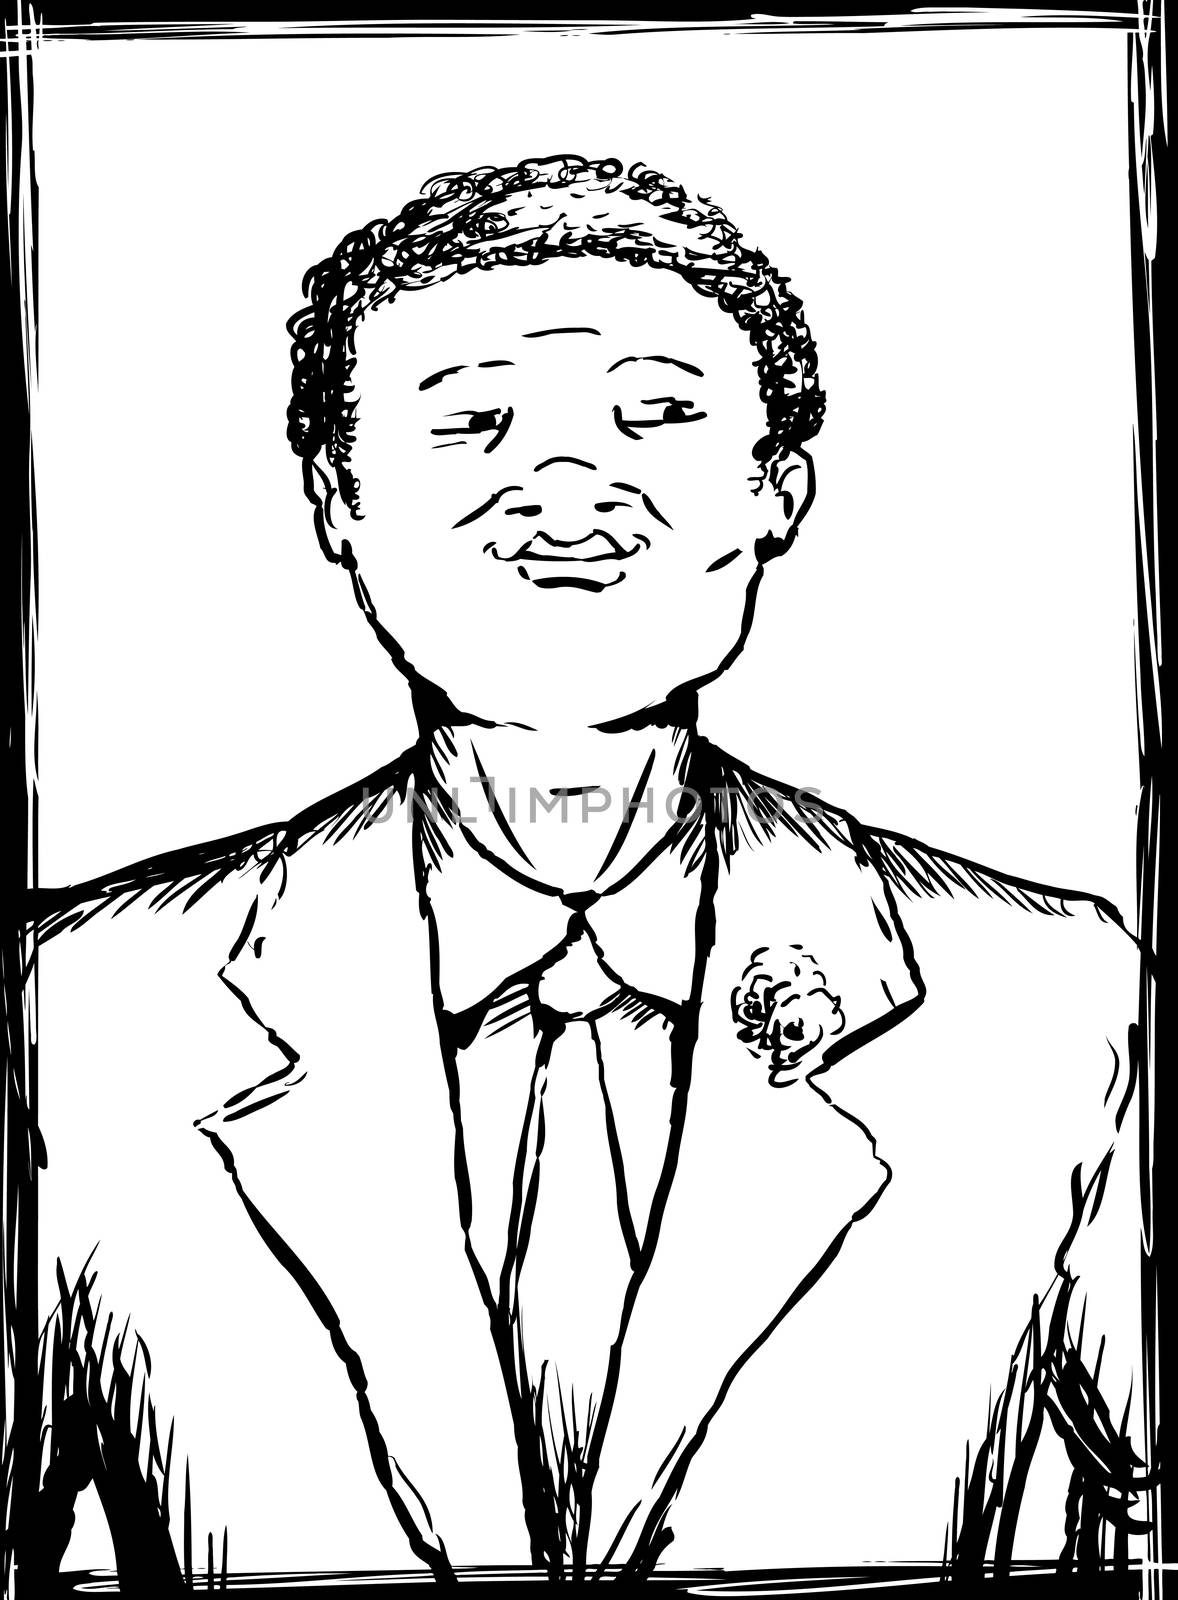 Smiling Black Teen in Suit by TheBlackRhino